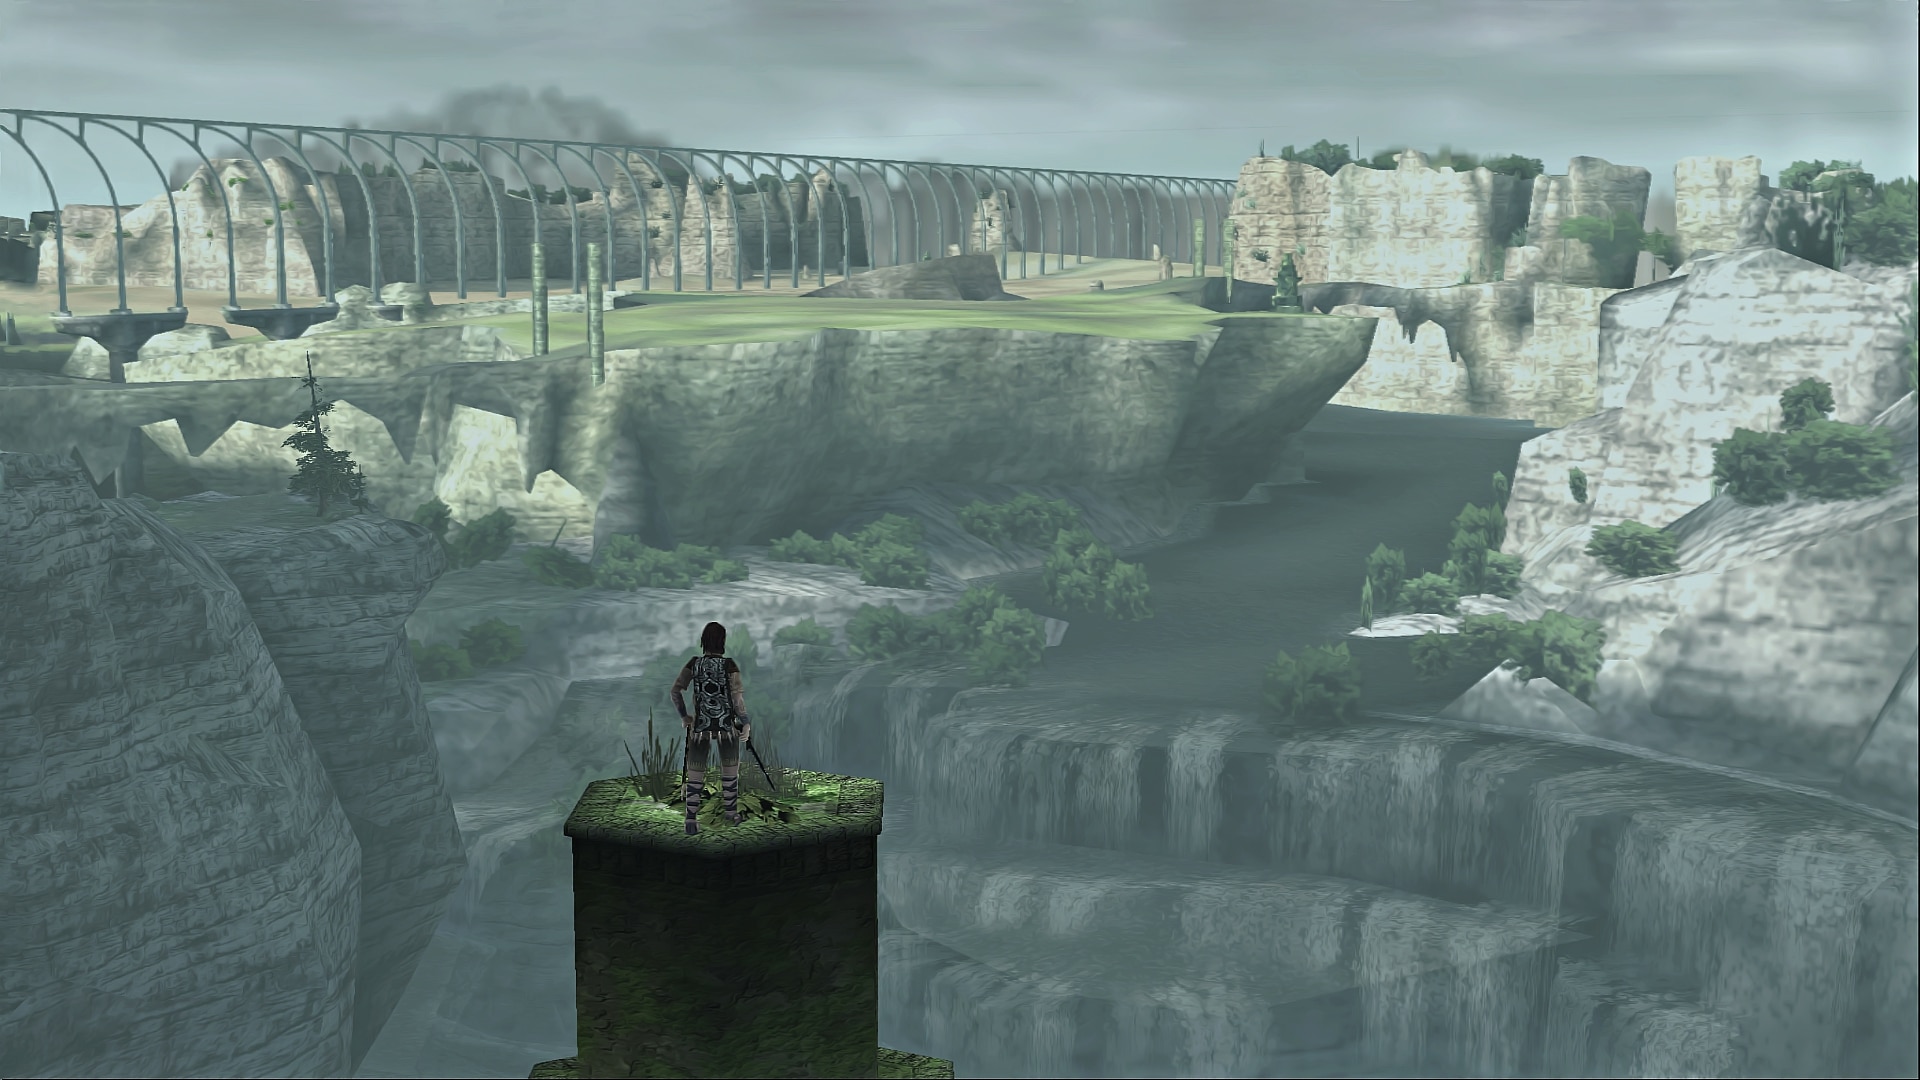 Shadow of the colossus